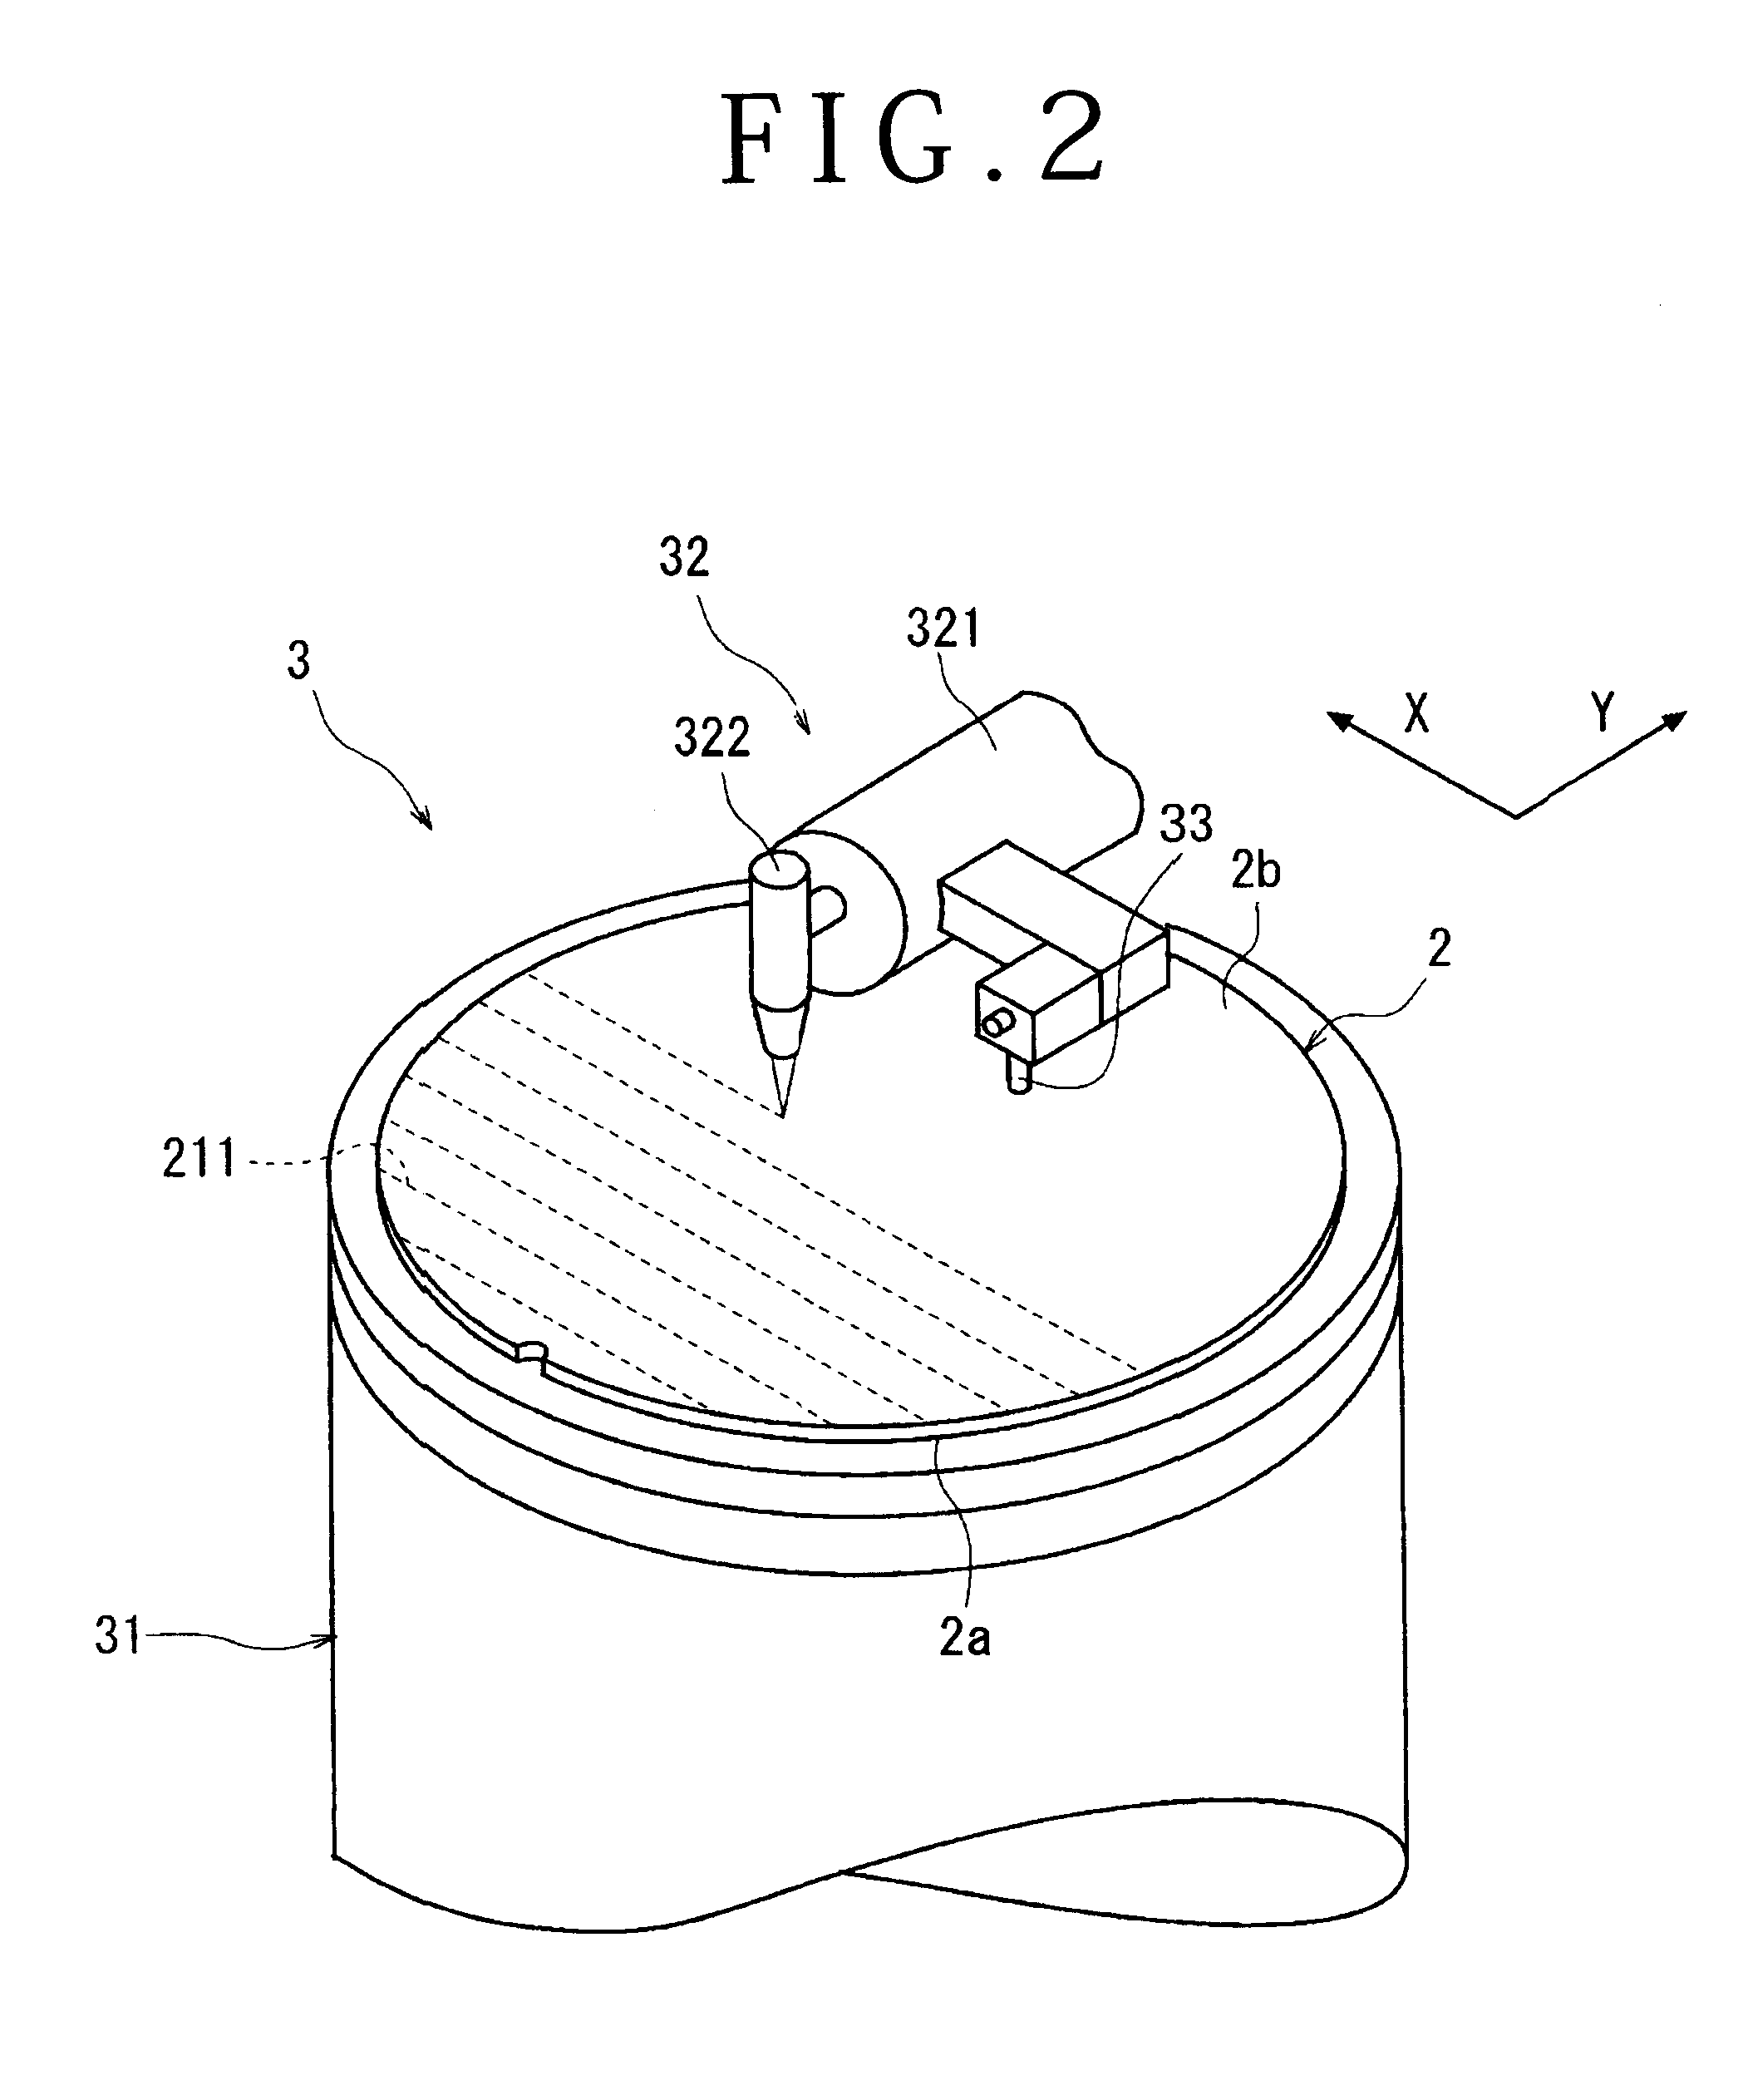 Method of processing optical device wafer